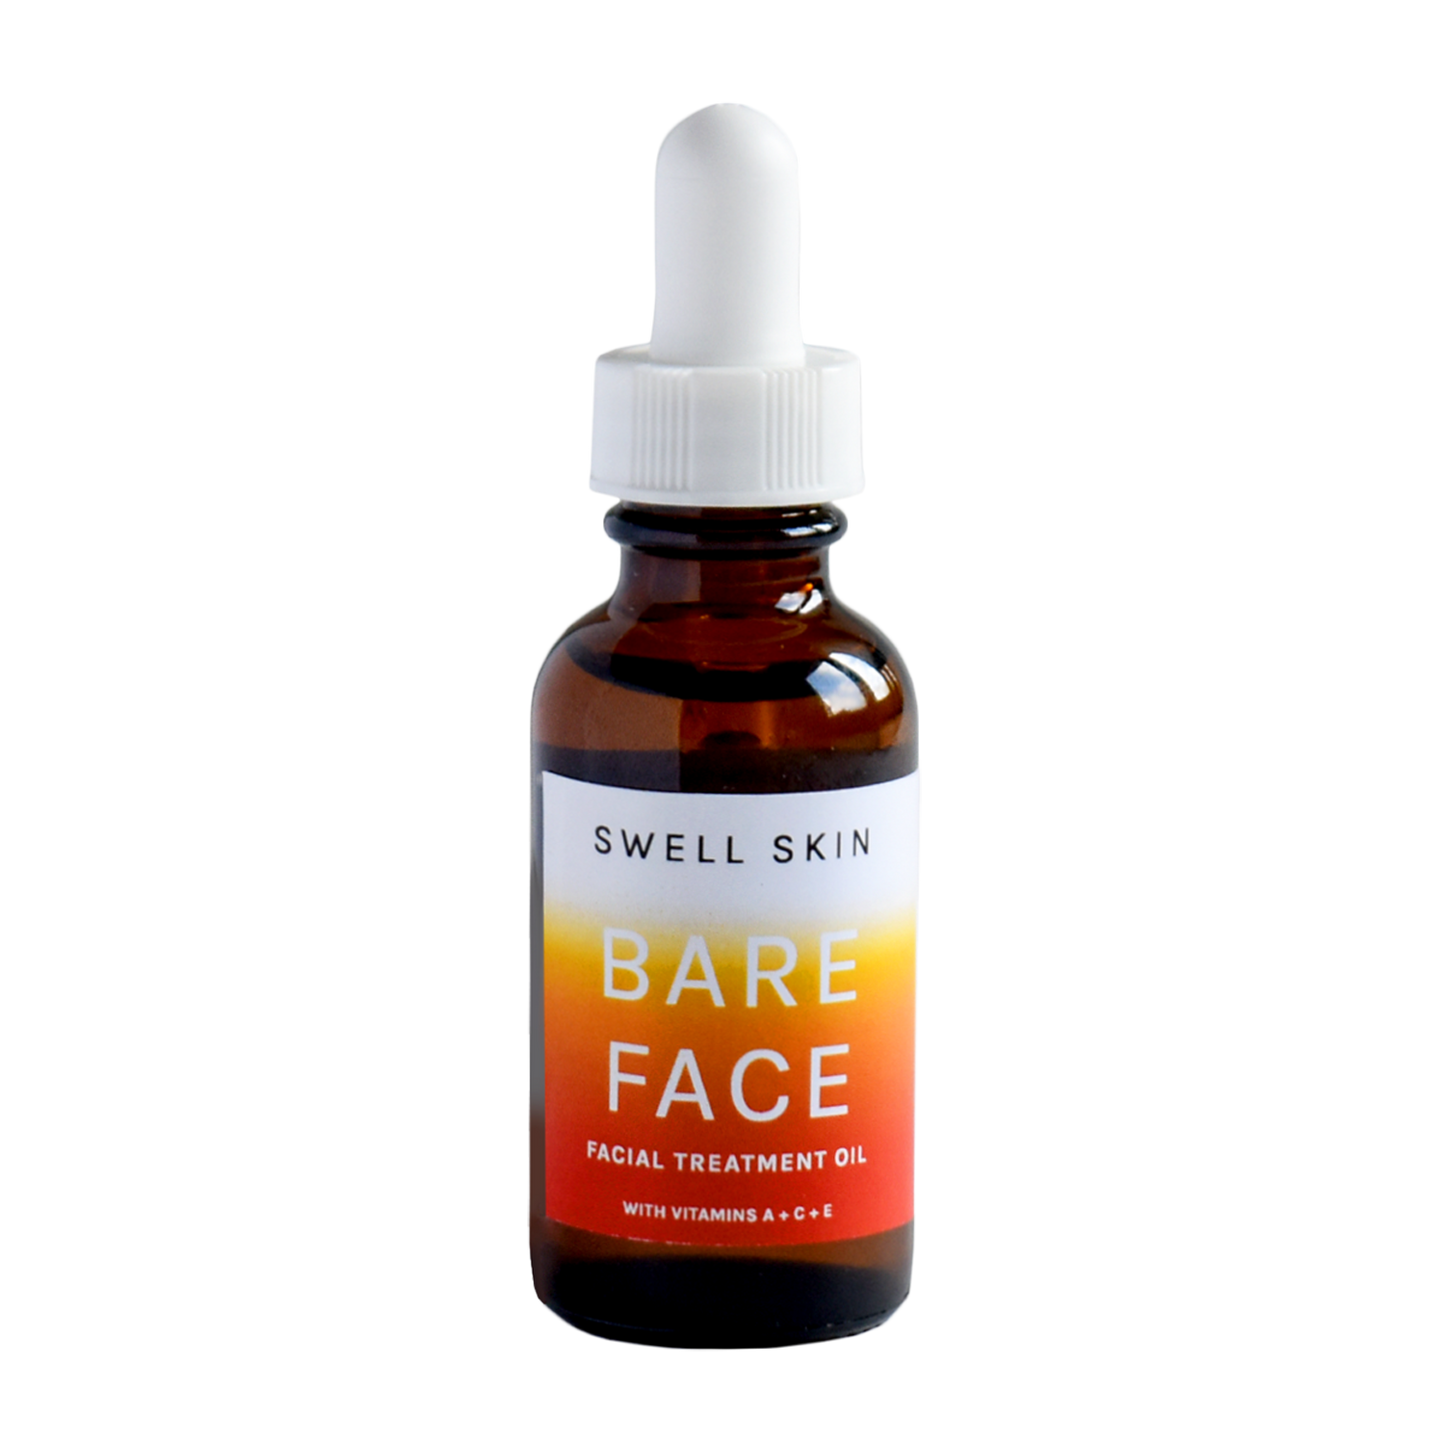 The Bare Face Kit